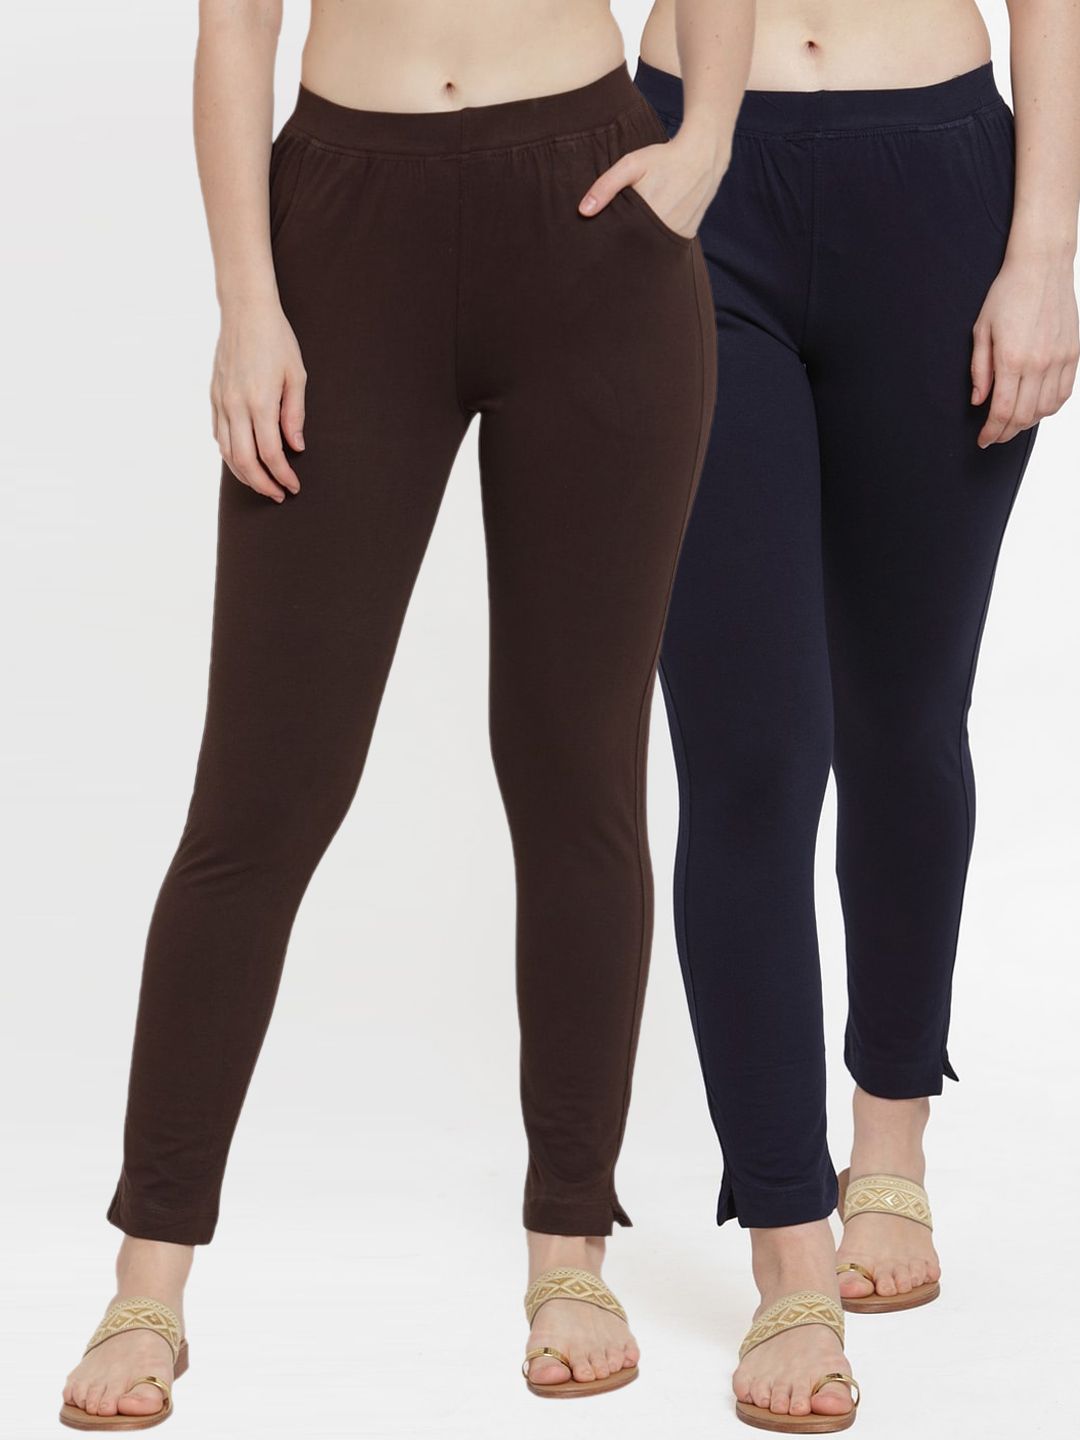 TAG 7 Women Pack Of 2 Navy Blue & Brown Solid Ankle-Length Leggings Price in India